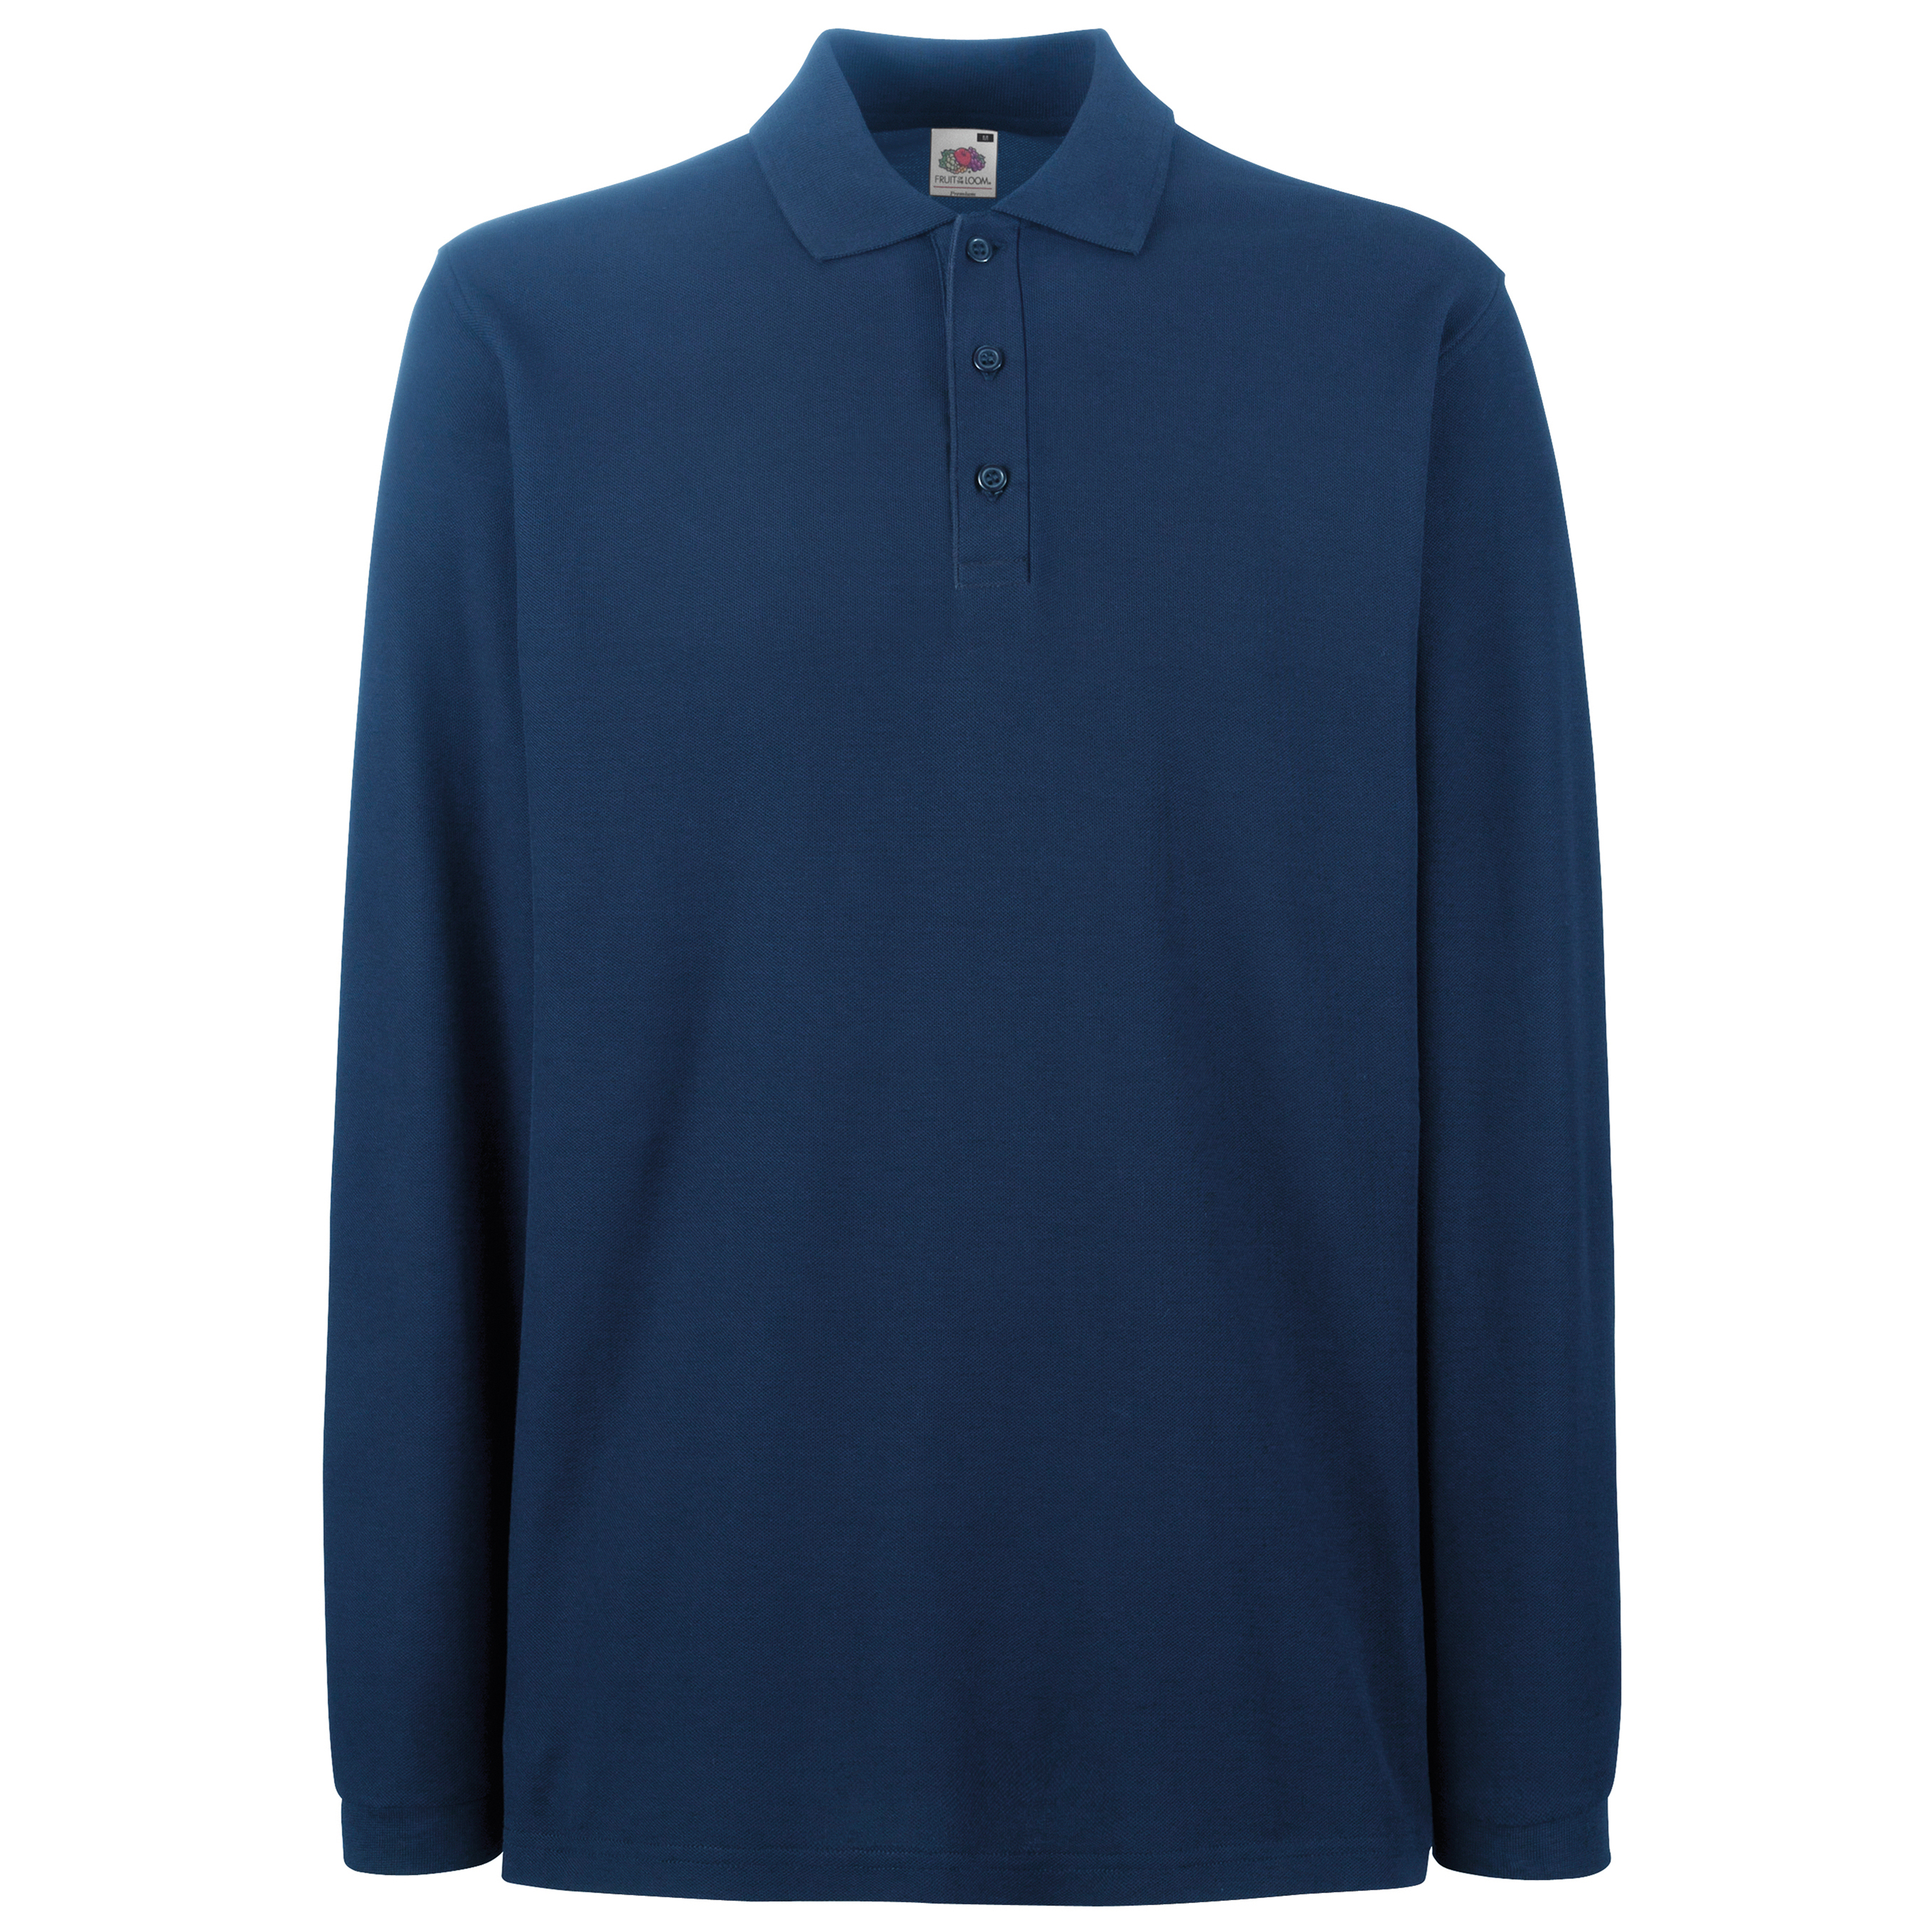 ax-httpswebsystems.s3.amazonaws.comtmp_for_downloadfruit-of-the-loom-long-sleeve-polo-navy.jpg